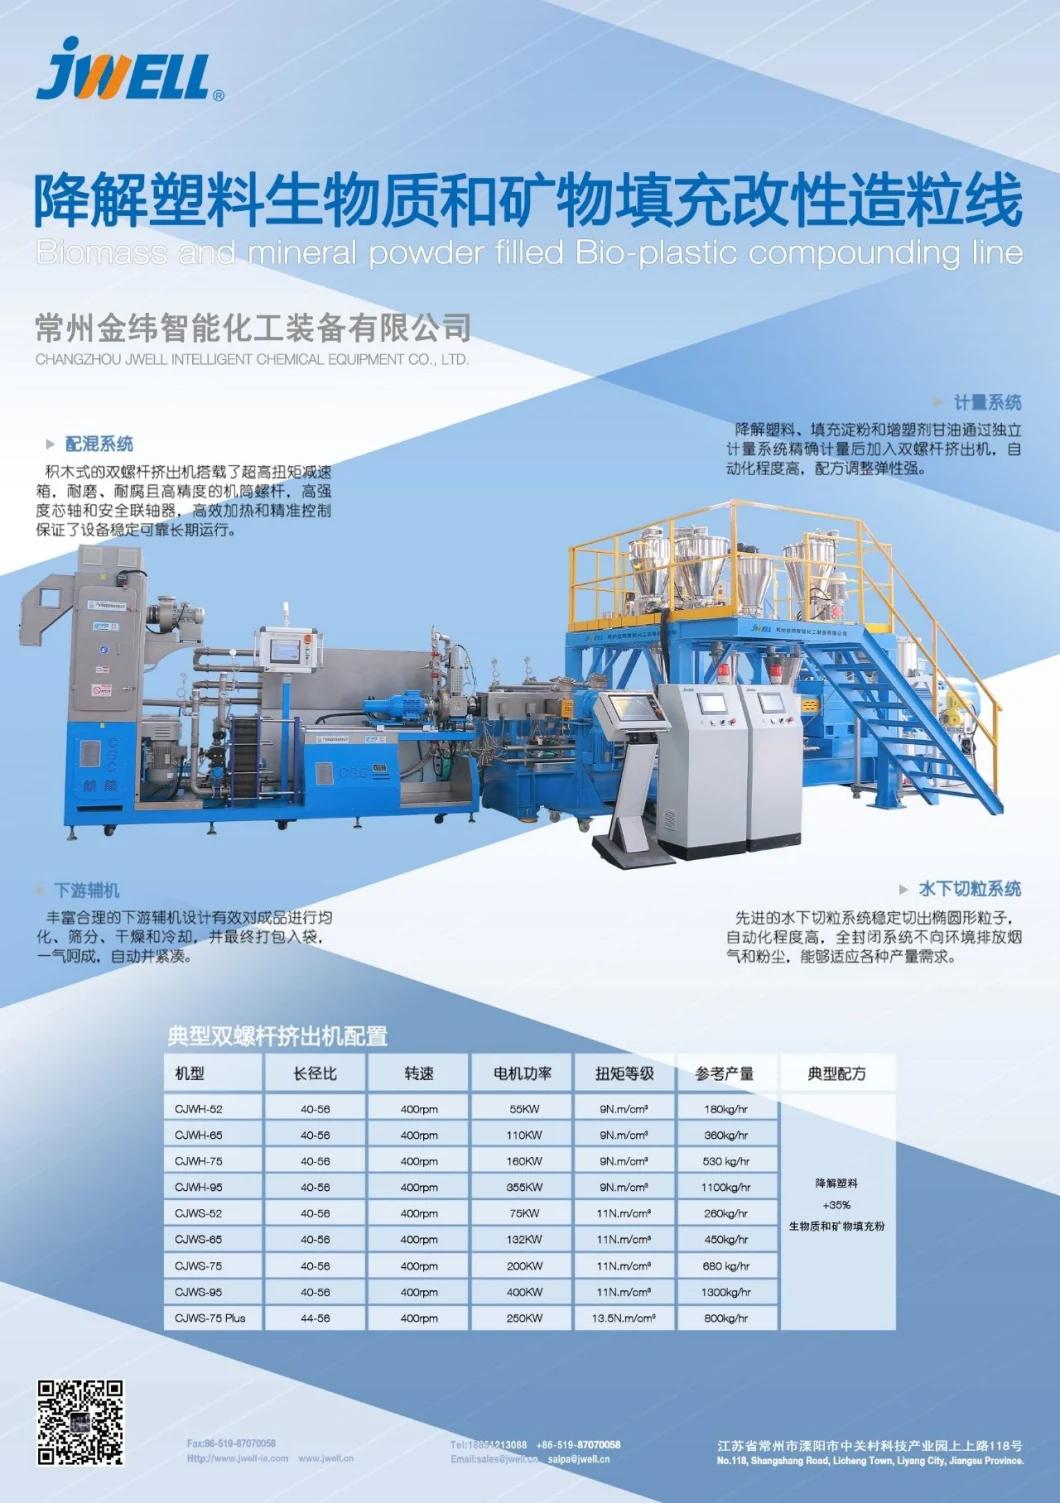 PP ABS PC Nylon Twin Screw Compounding Machine From Jwell Company